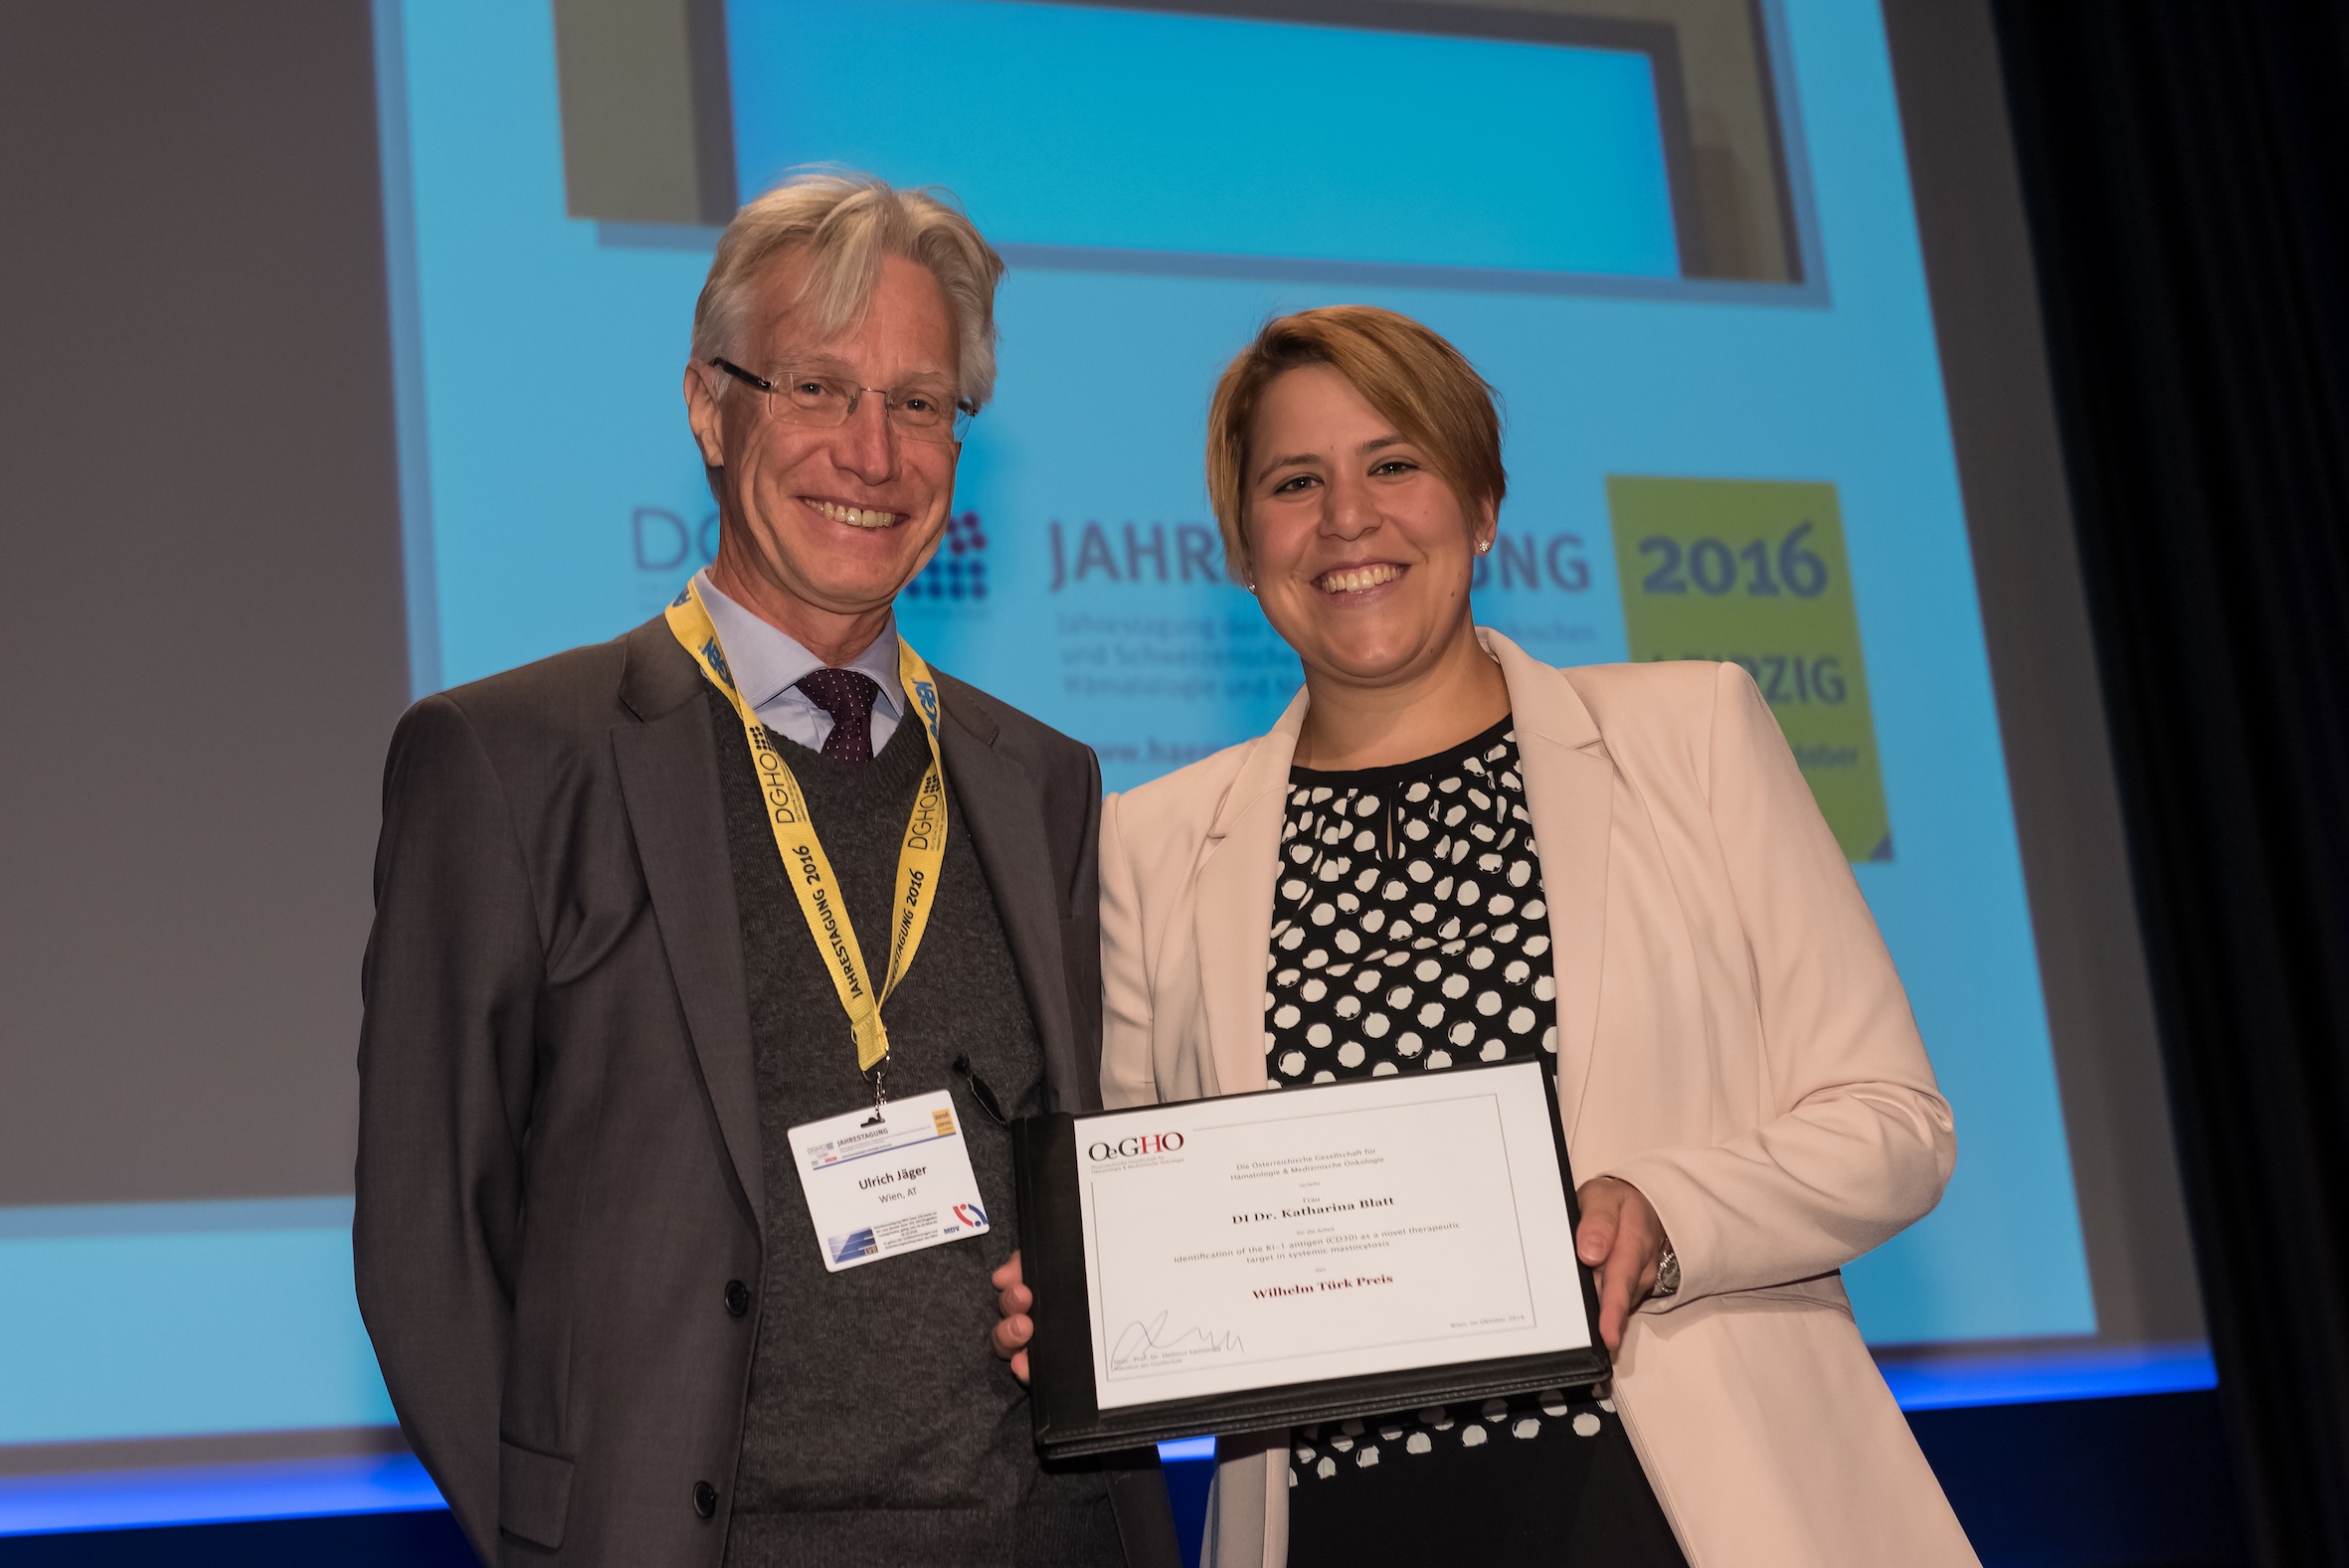 The Wilhelm Turk Prize of the Austrian Society for Hematology & Medical Oncology (OeGHO) has been awarded to DI. Dr. Katharina Blatt